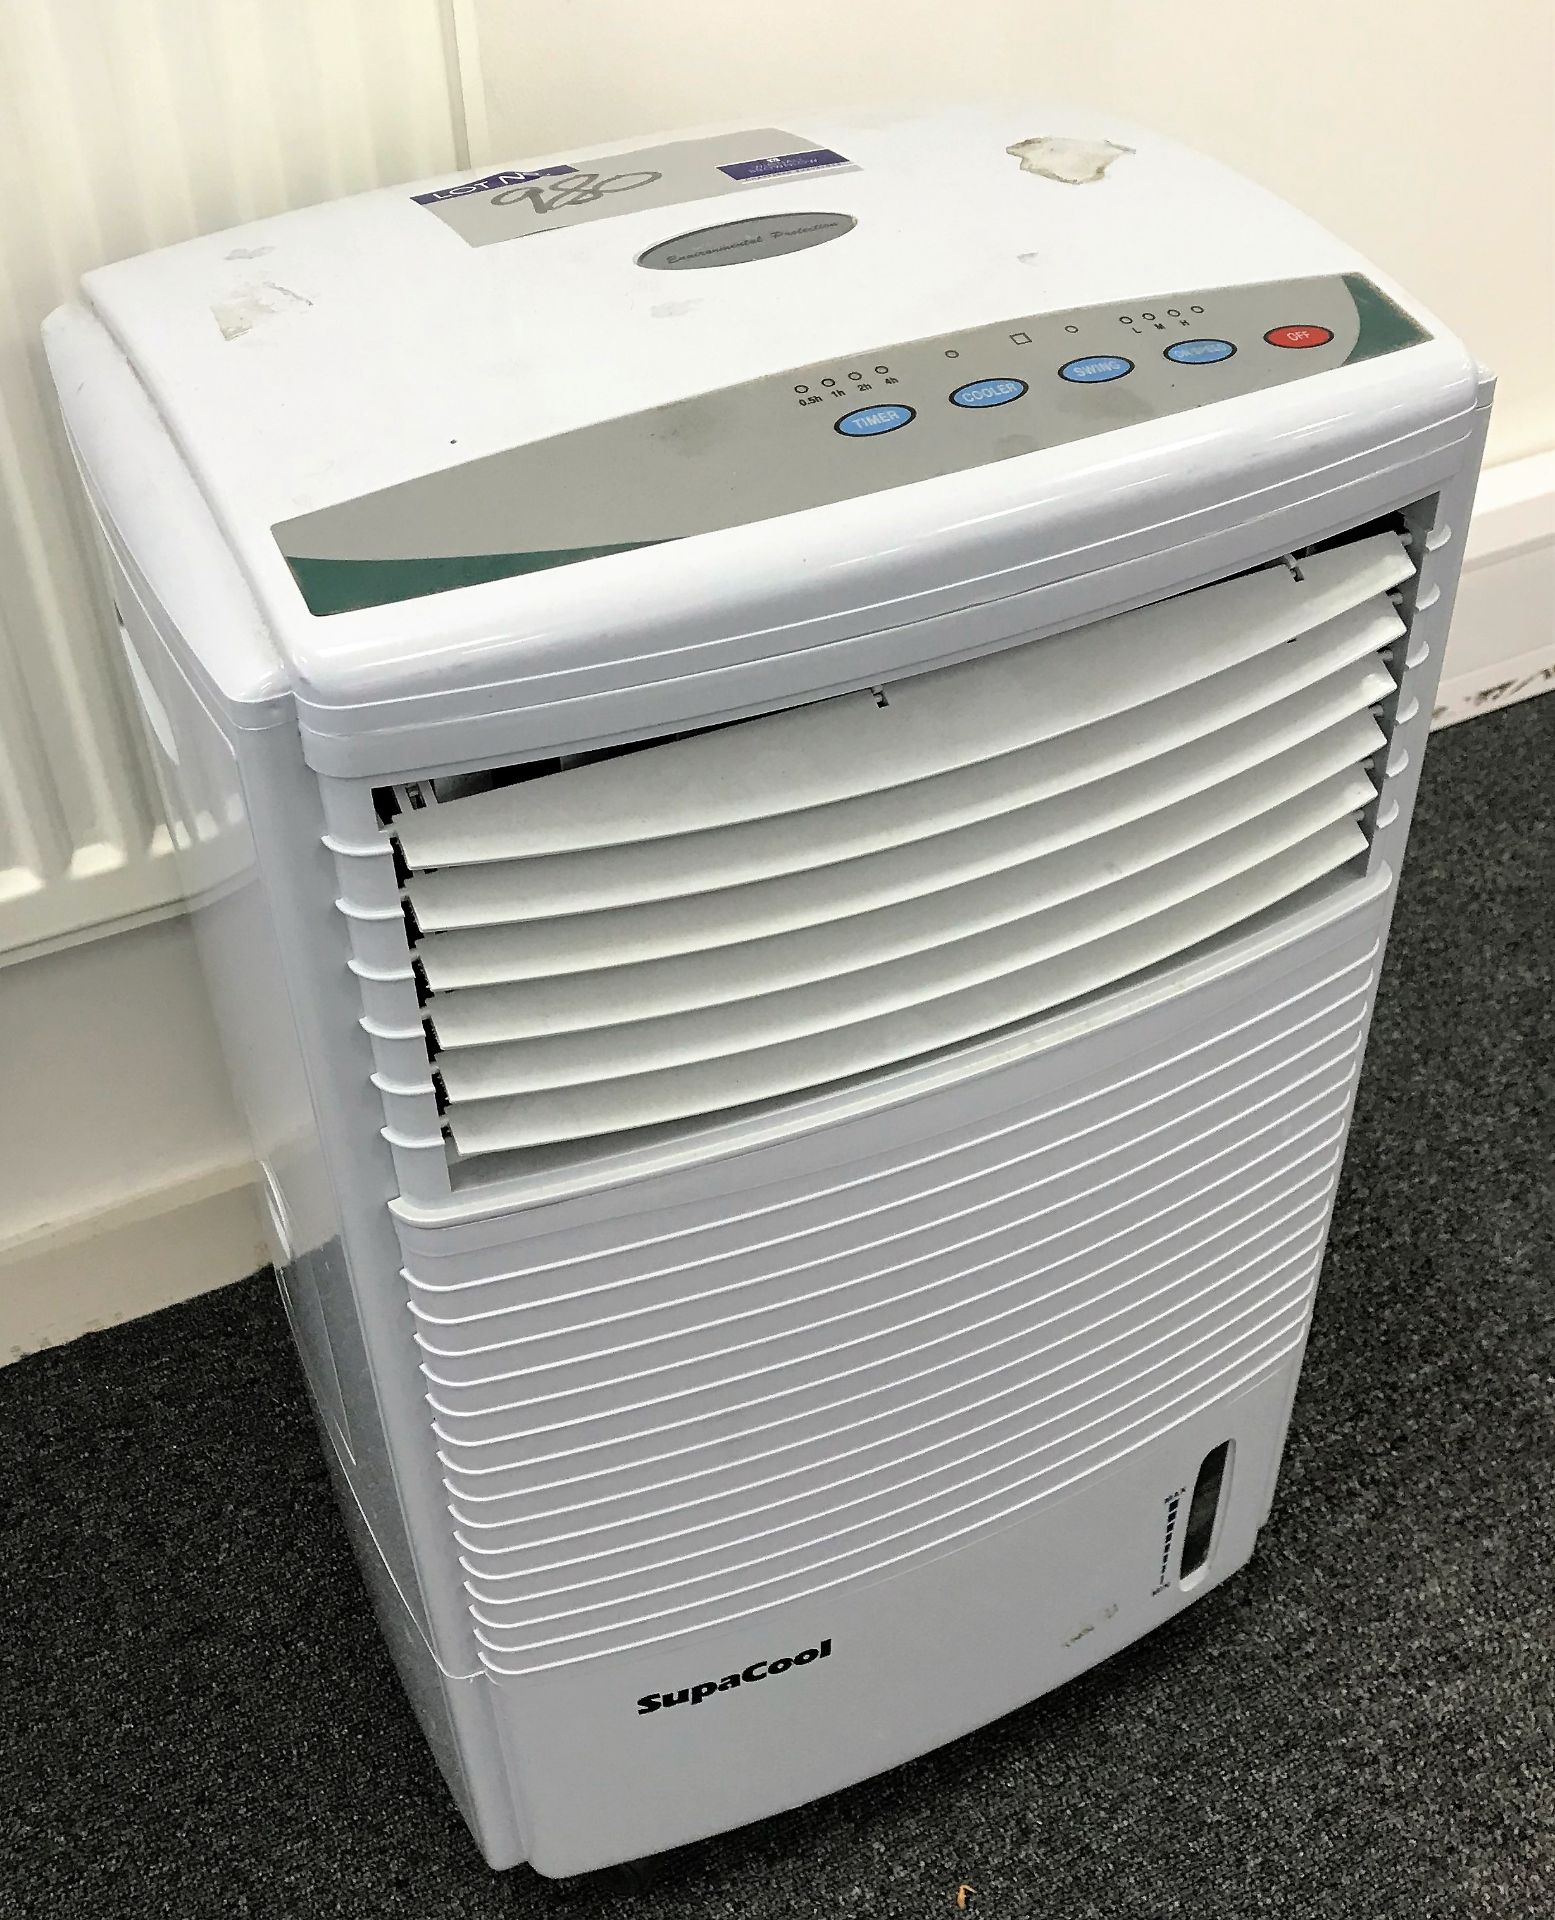 A SupaCool SCAC1A Mobile Air Conditioning Unit with remote controller.